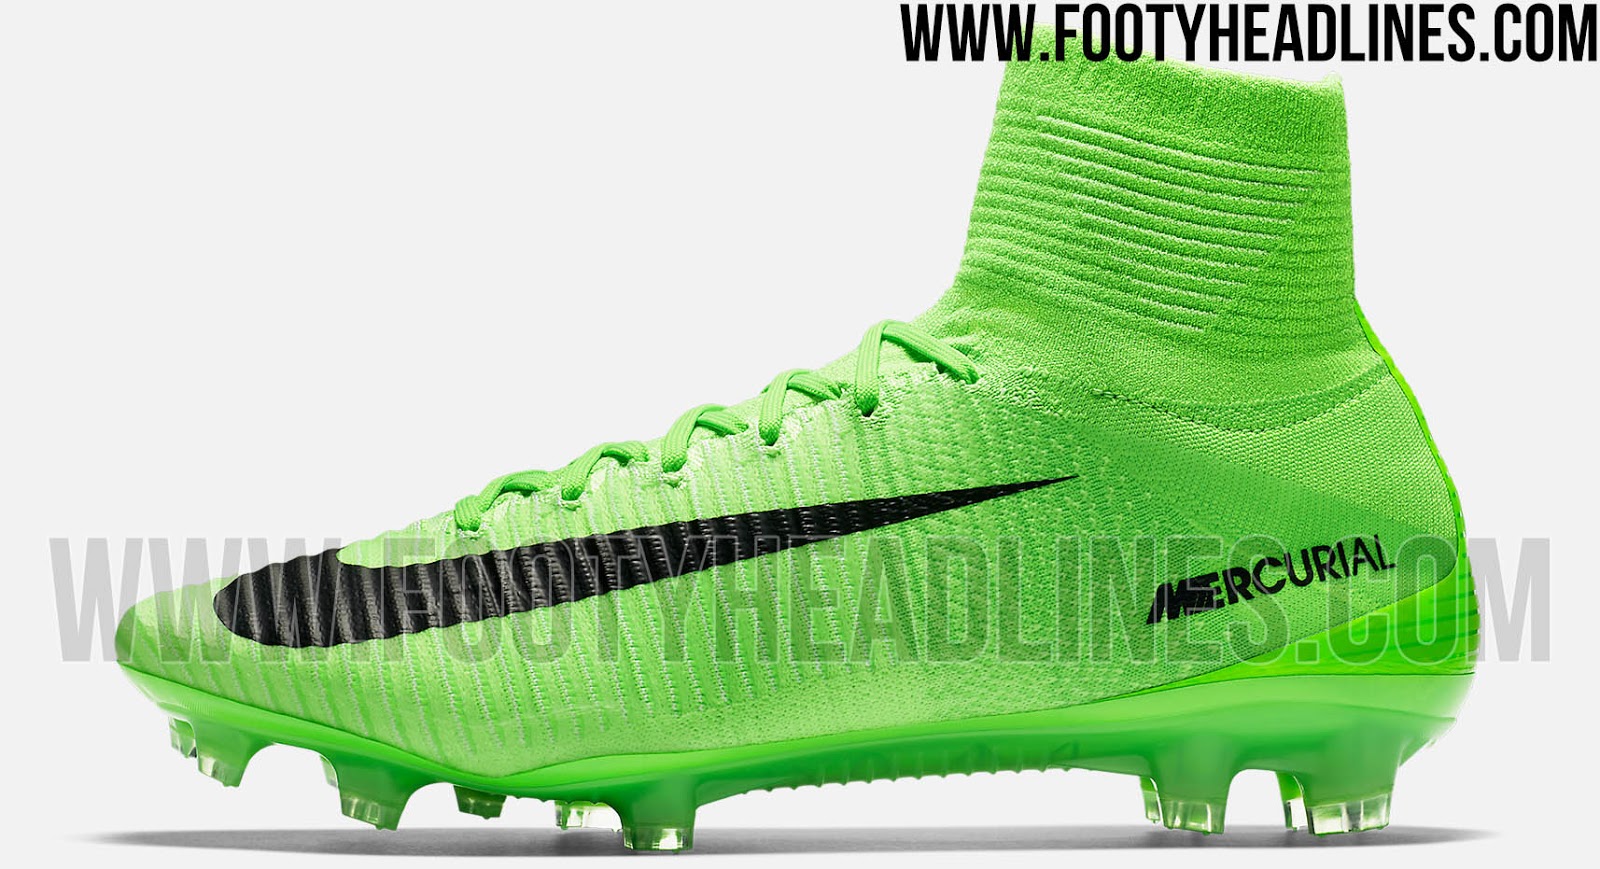 Updated Design: Electric Nike Mercurial Superfly V Radiation Flare 2017 Boots Revealed - Footy Headlines